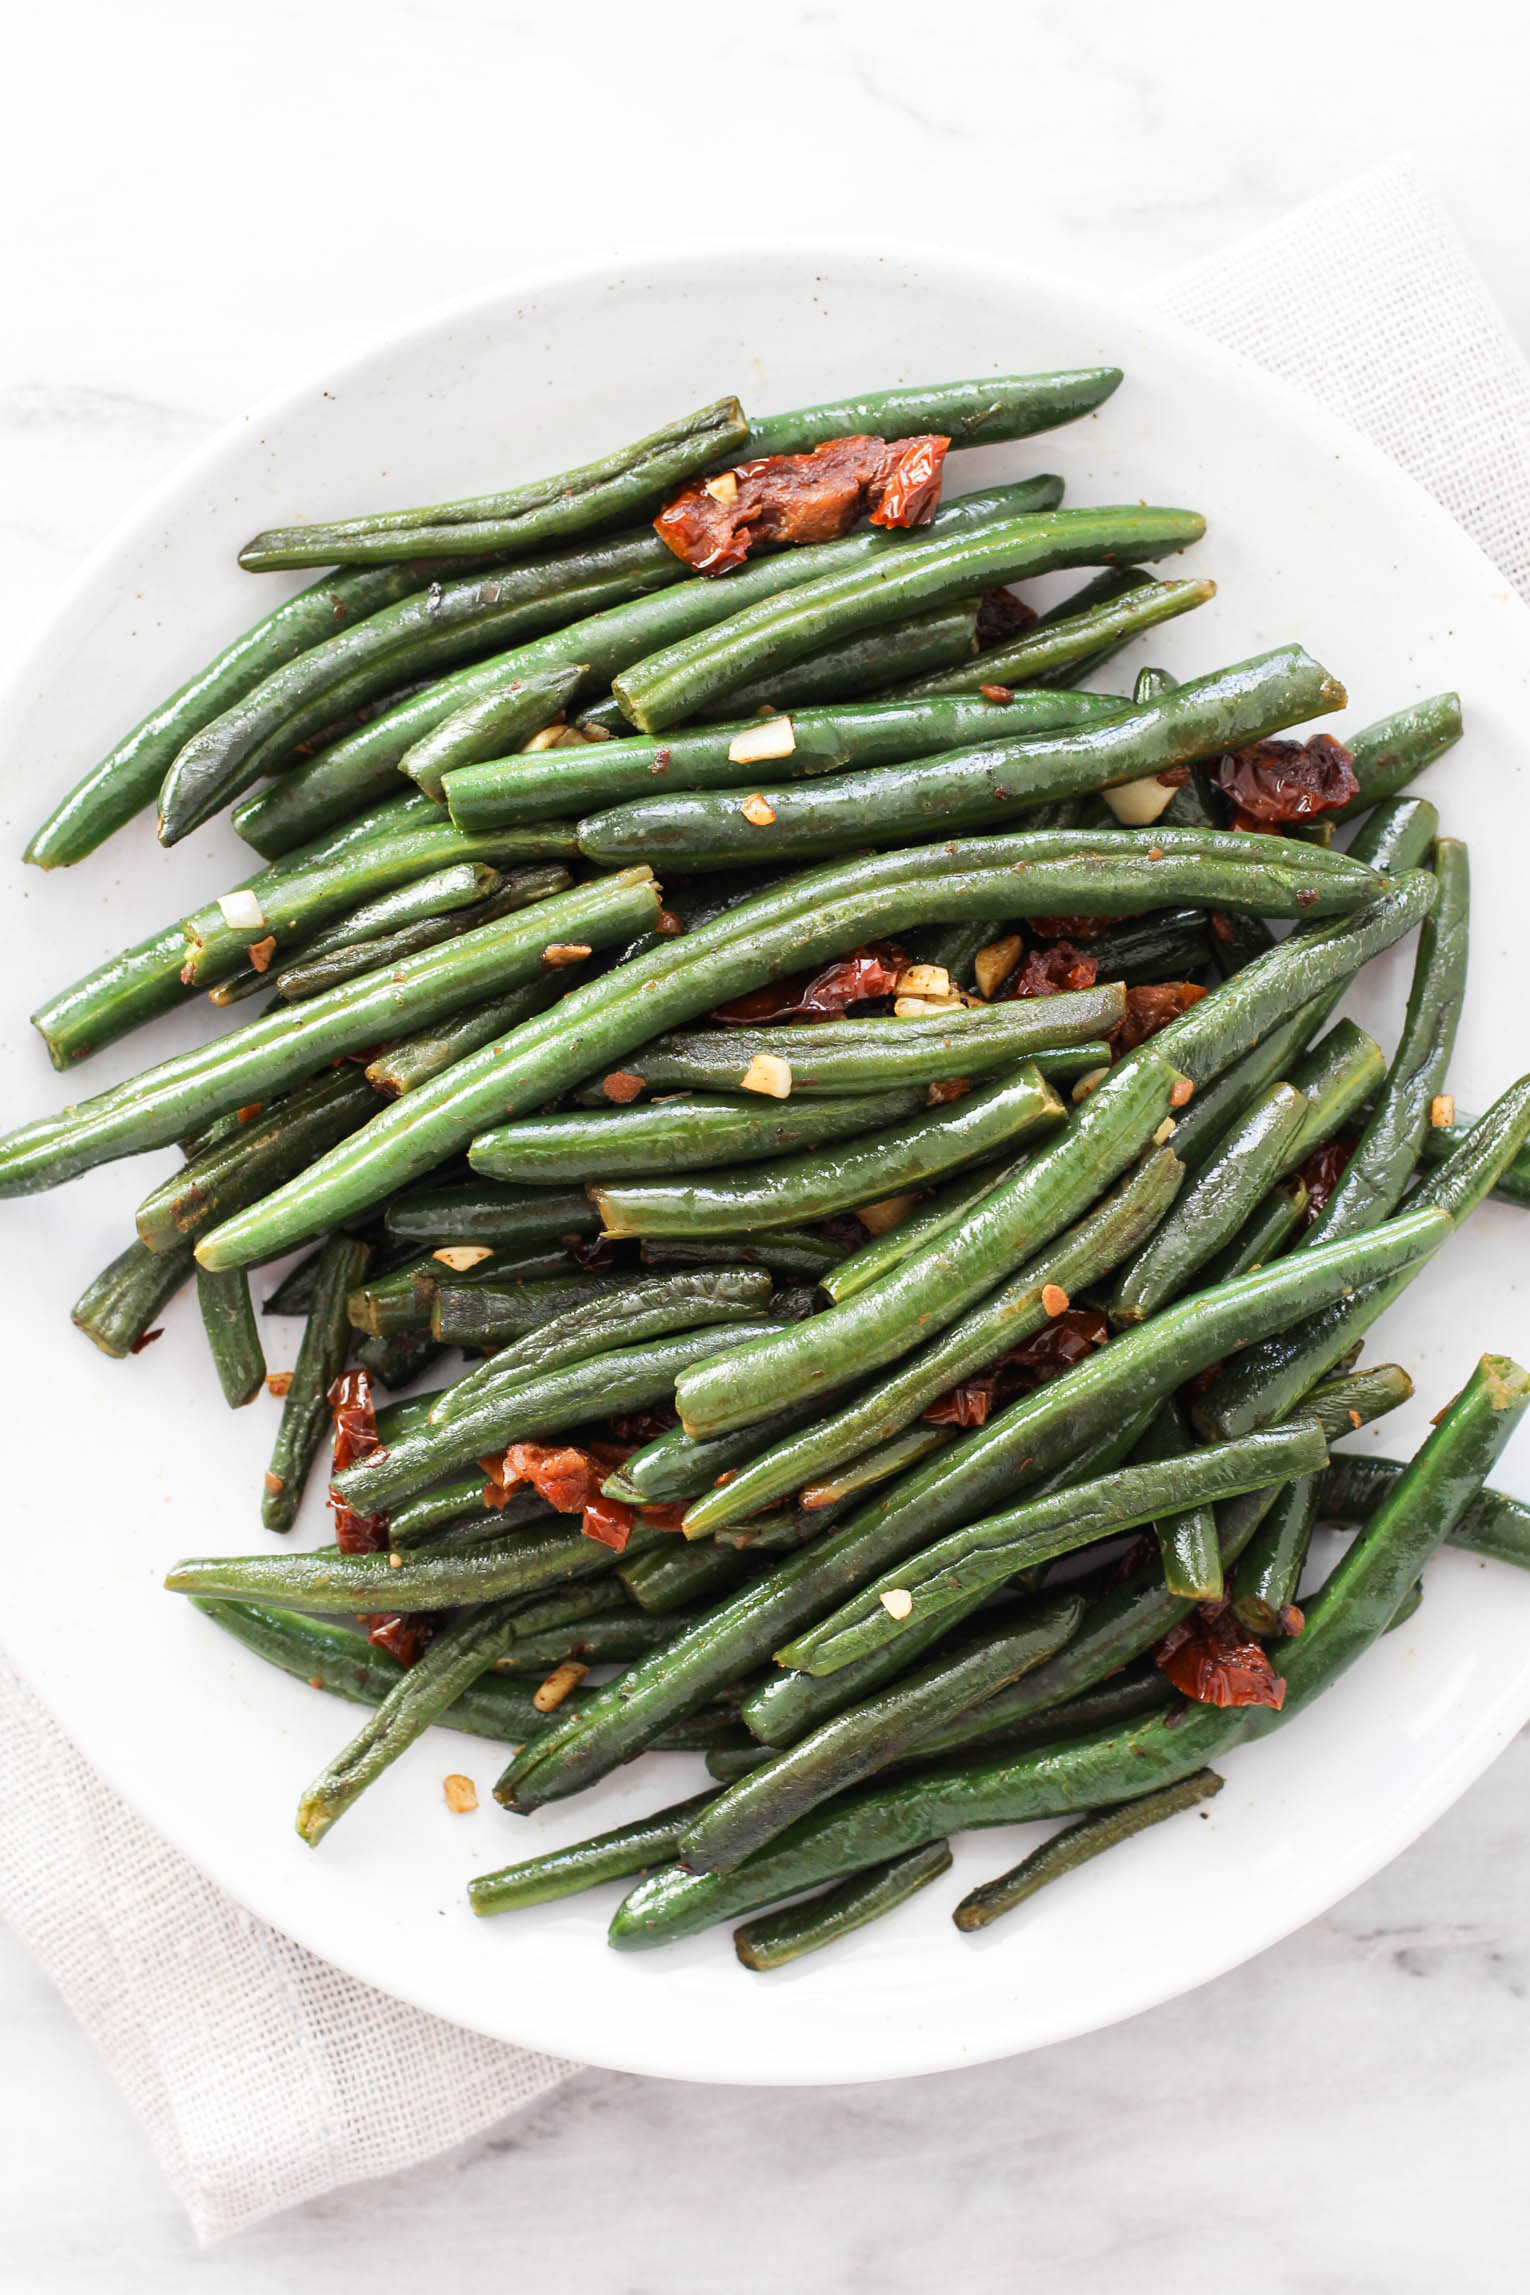 Green beans with sun-dried tomatoes and garlic on a white plate.